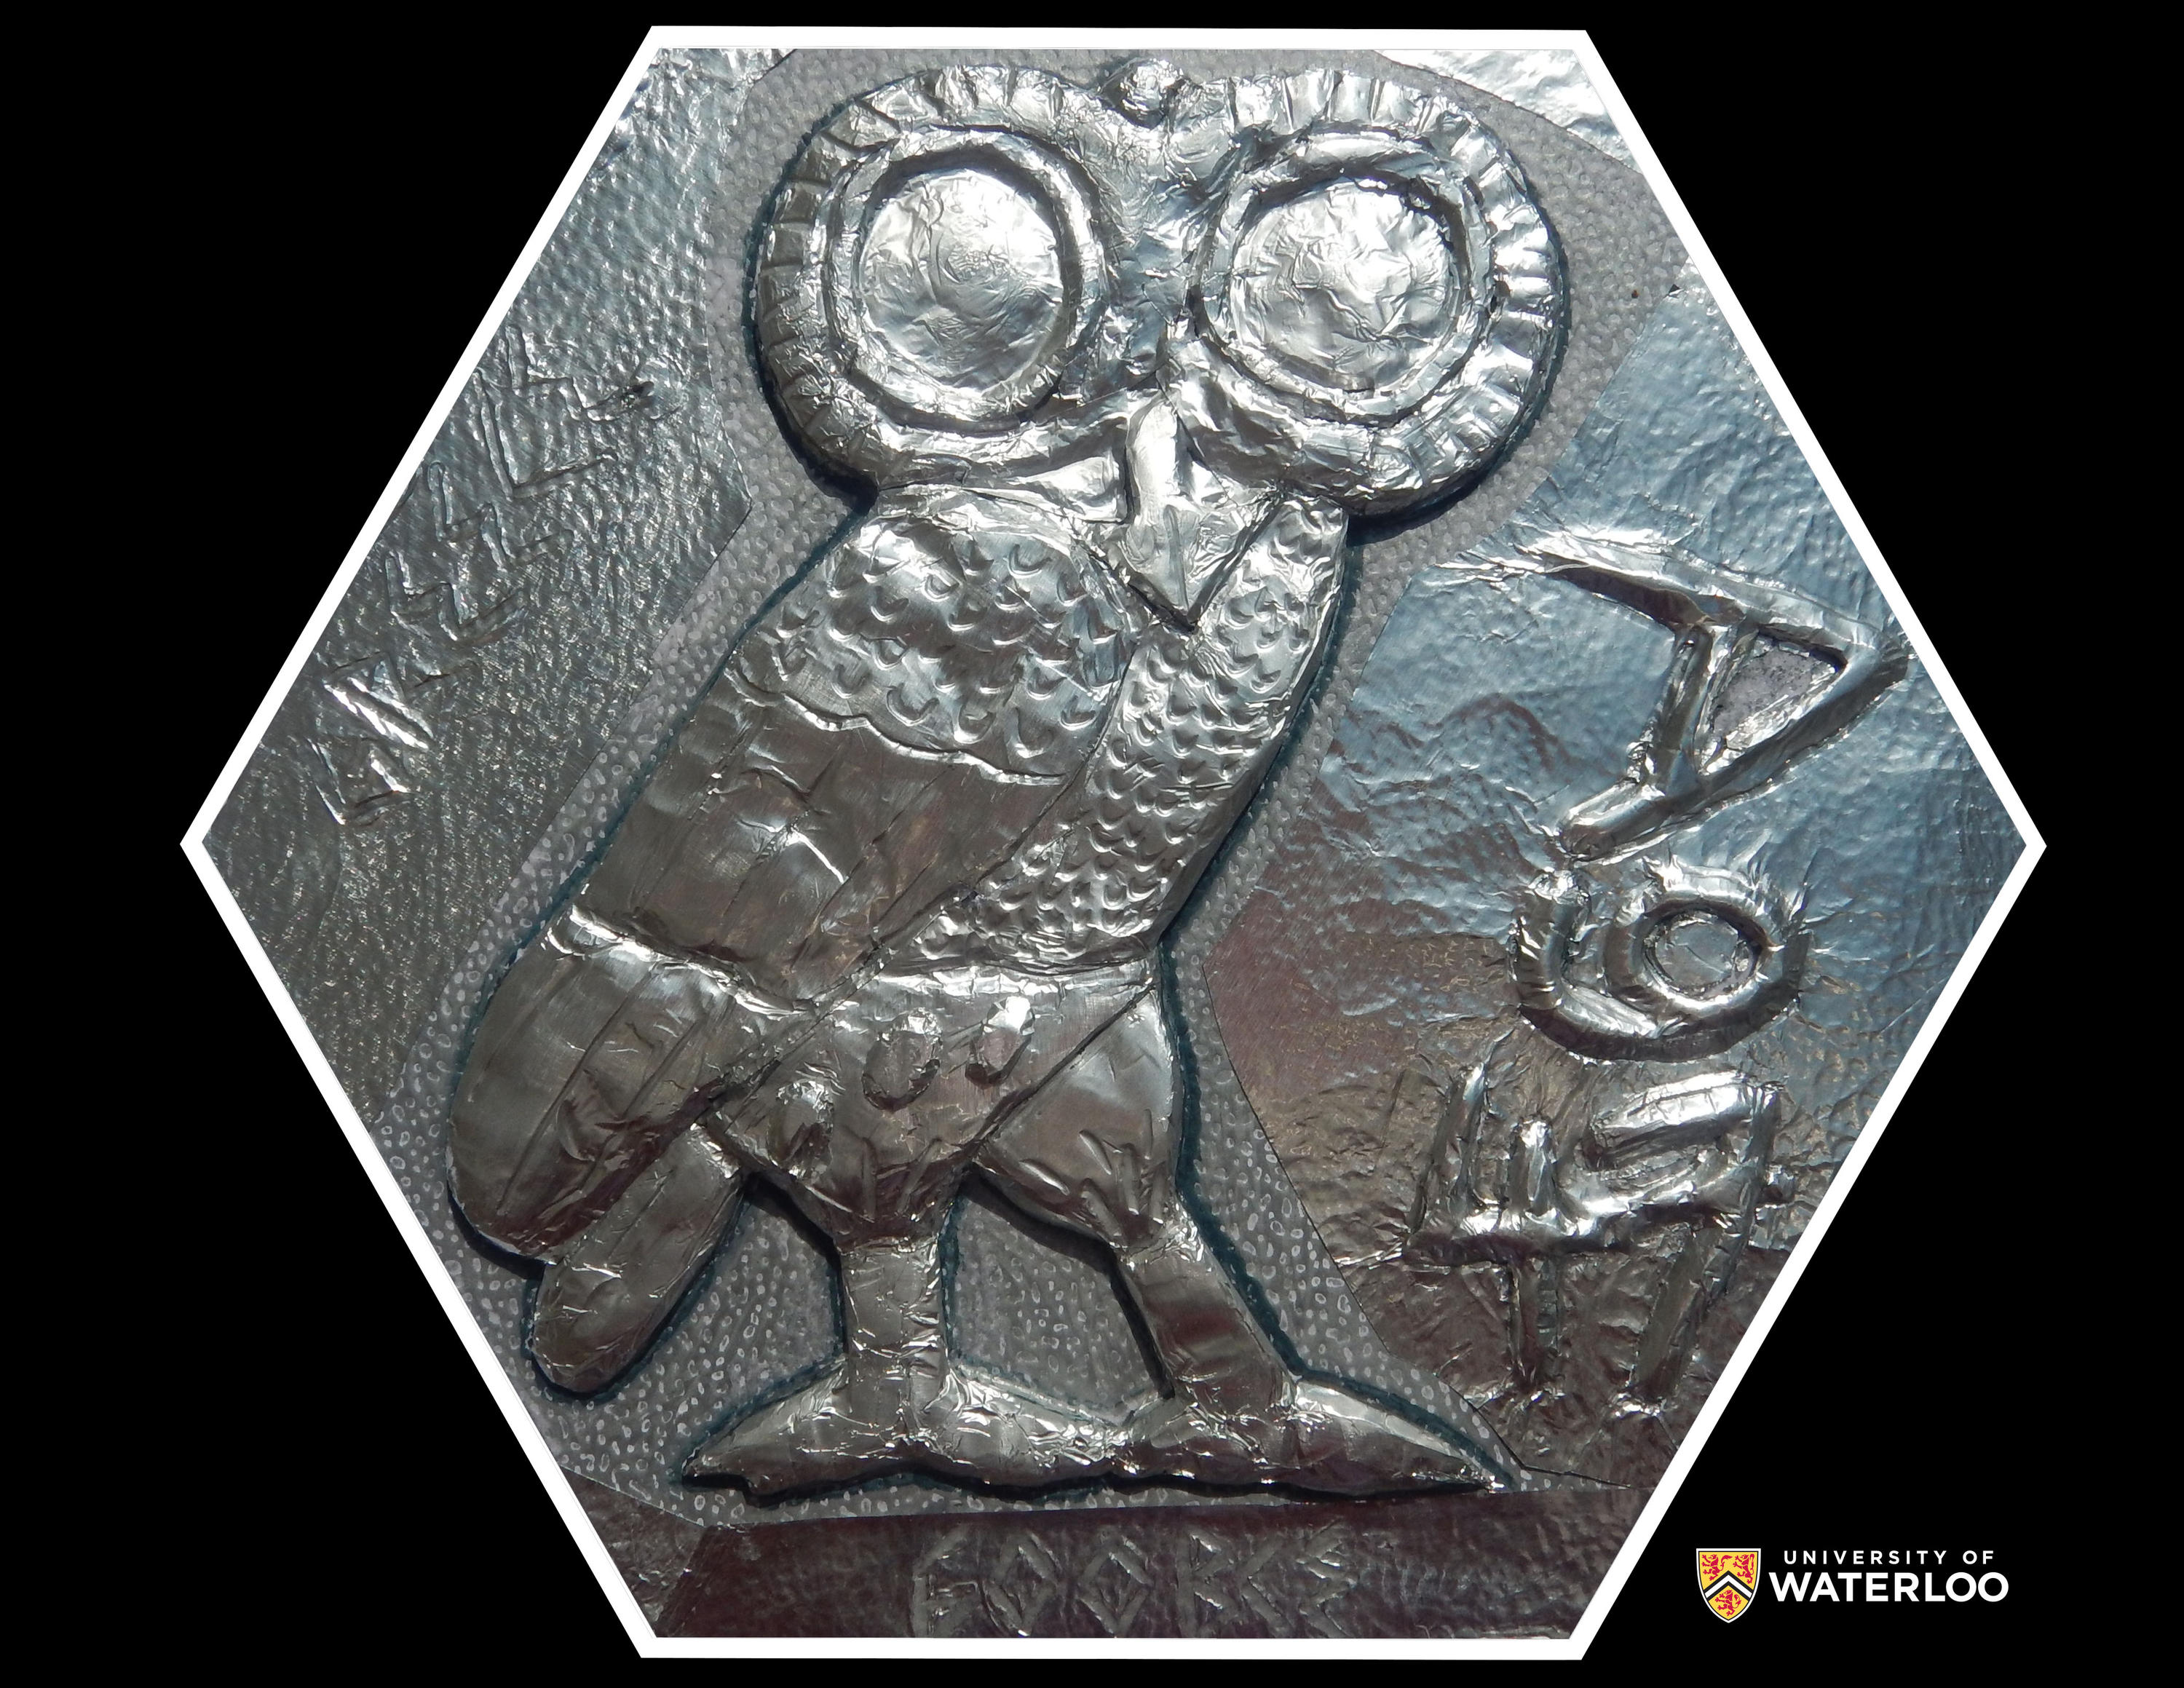 Aluminum foil relief over clay. Large owl centre. Chemical symbol “Ag” and atomic number “47” on the right. On the left “Greece”; bottom is “600 BCE”.